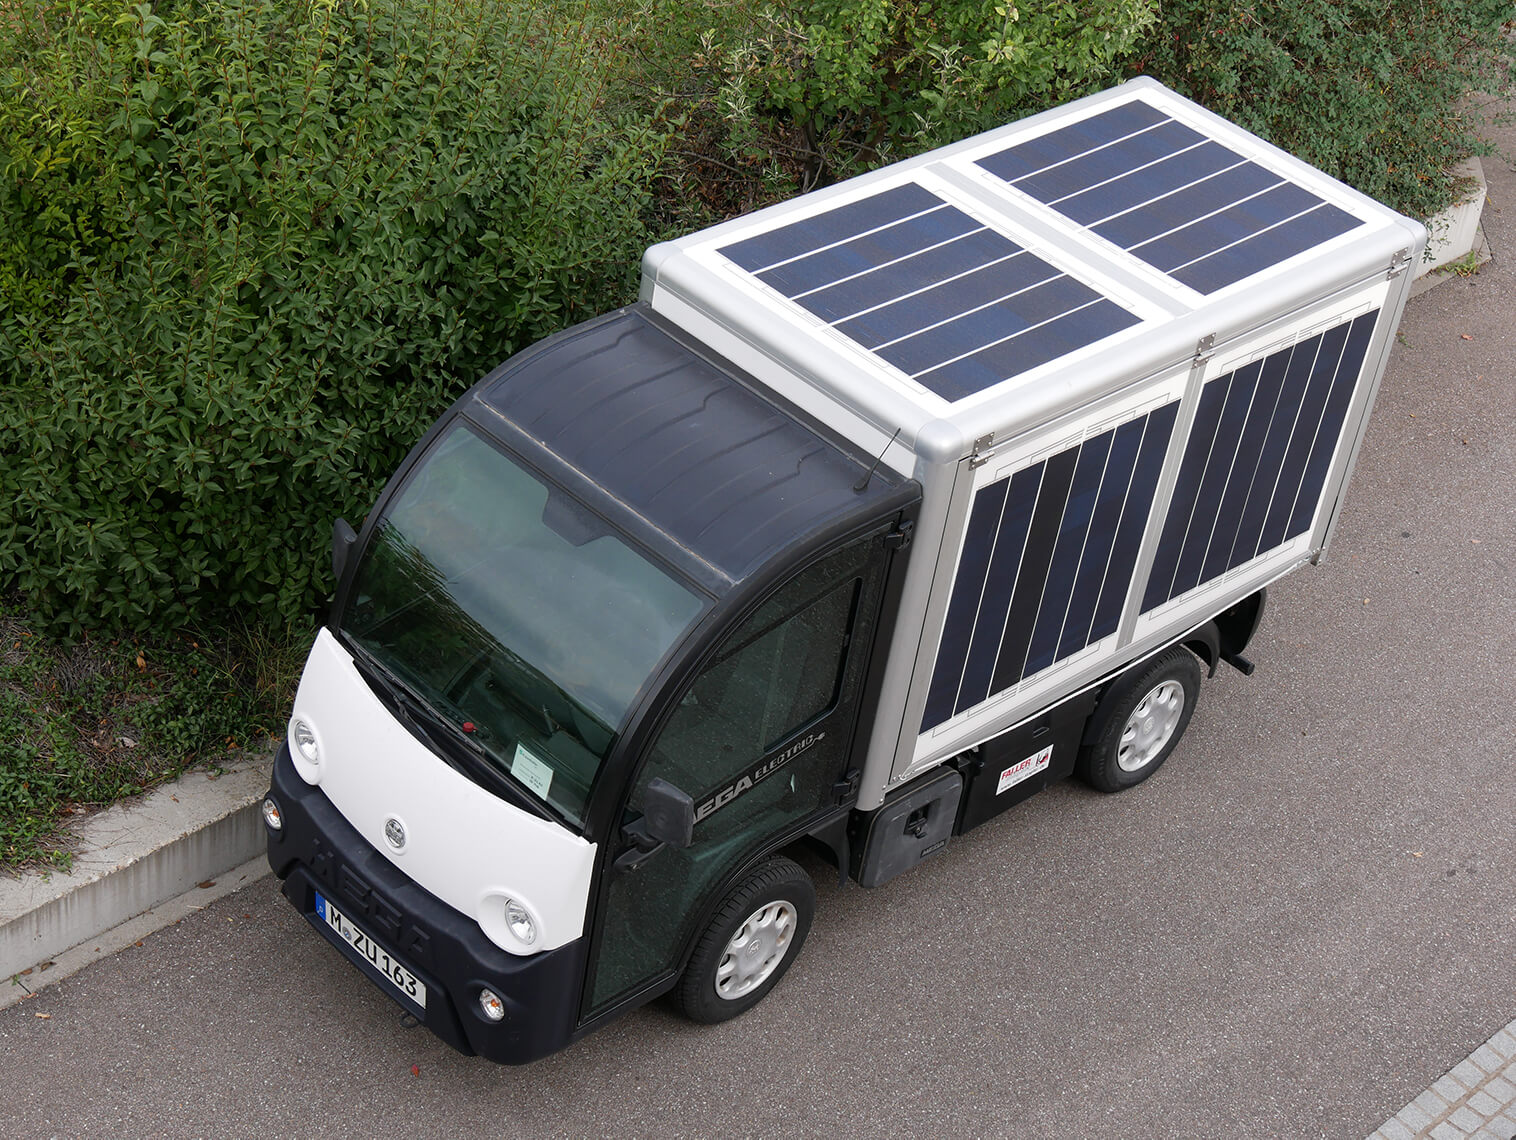 Mini E-truck of Fraunhofer ISE with integrated shingle solar cells.